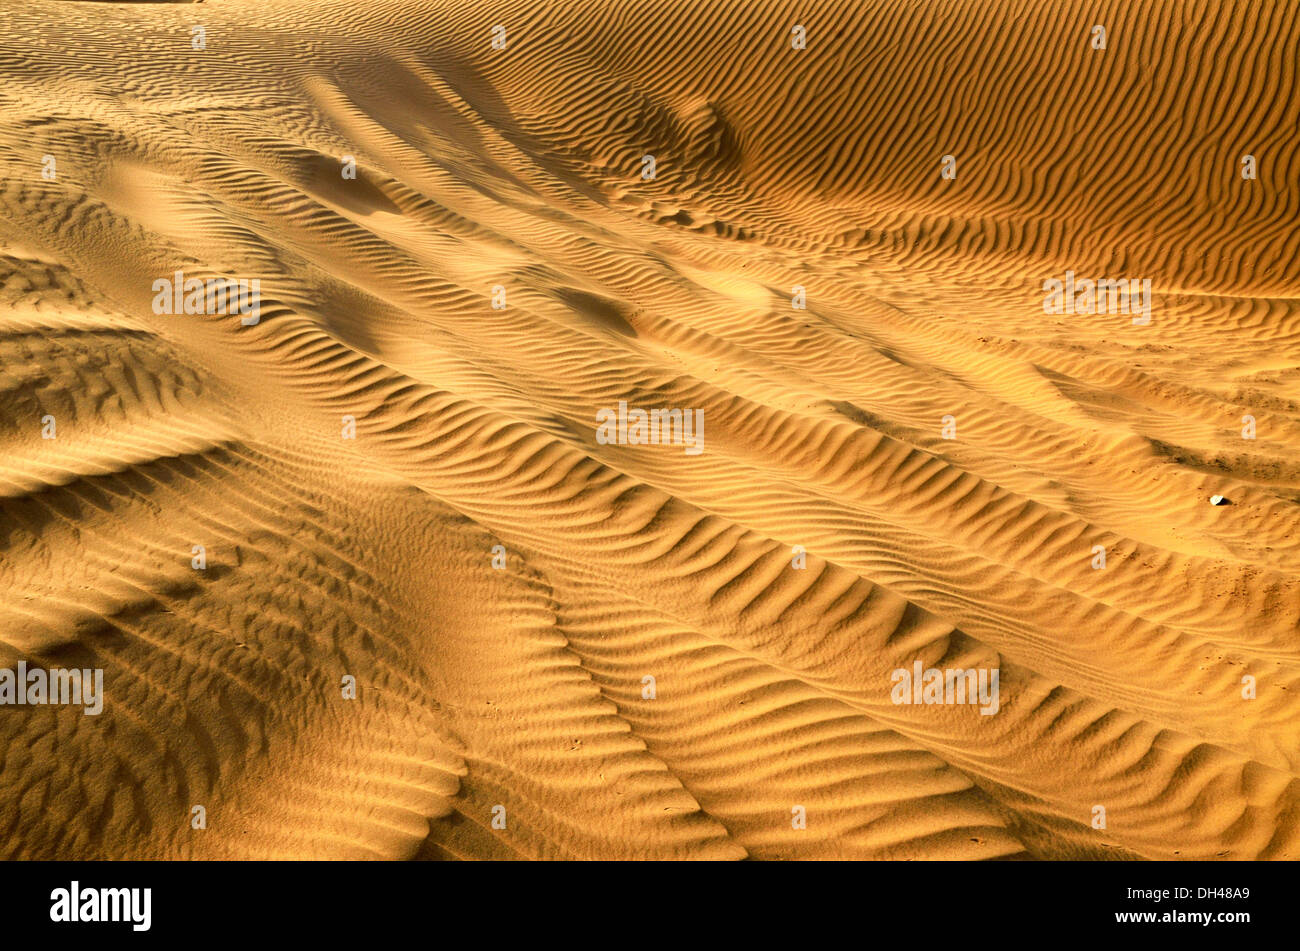 Diagonal curve and ripples on desert sand dunes Rajasthan India Asia Stock Photo